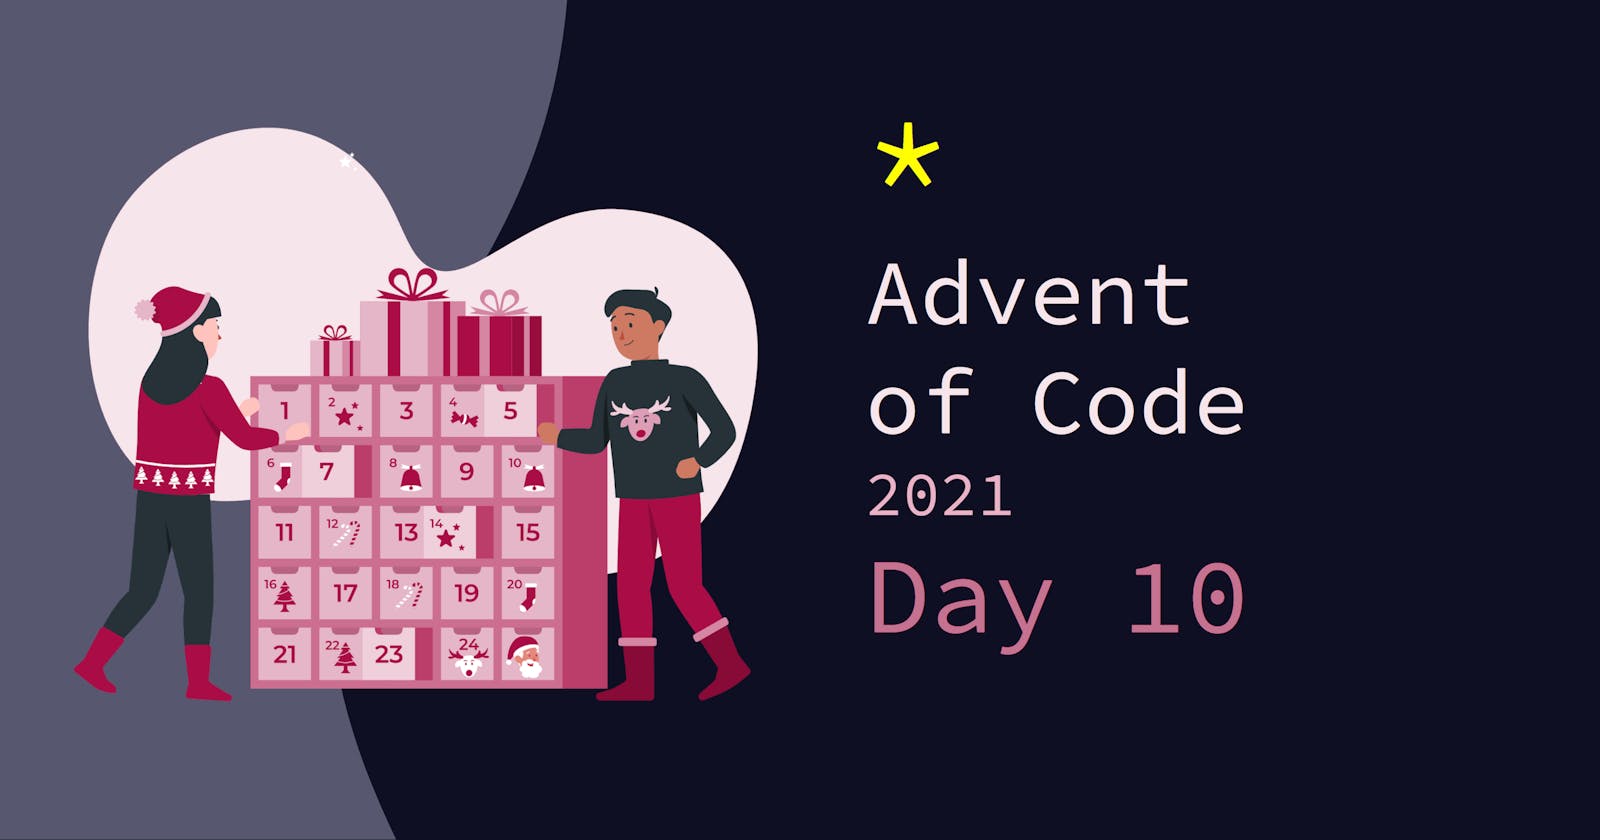 Advent of Code 2021: Day 10